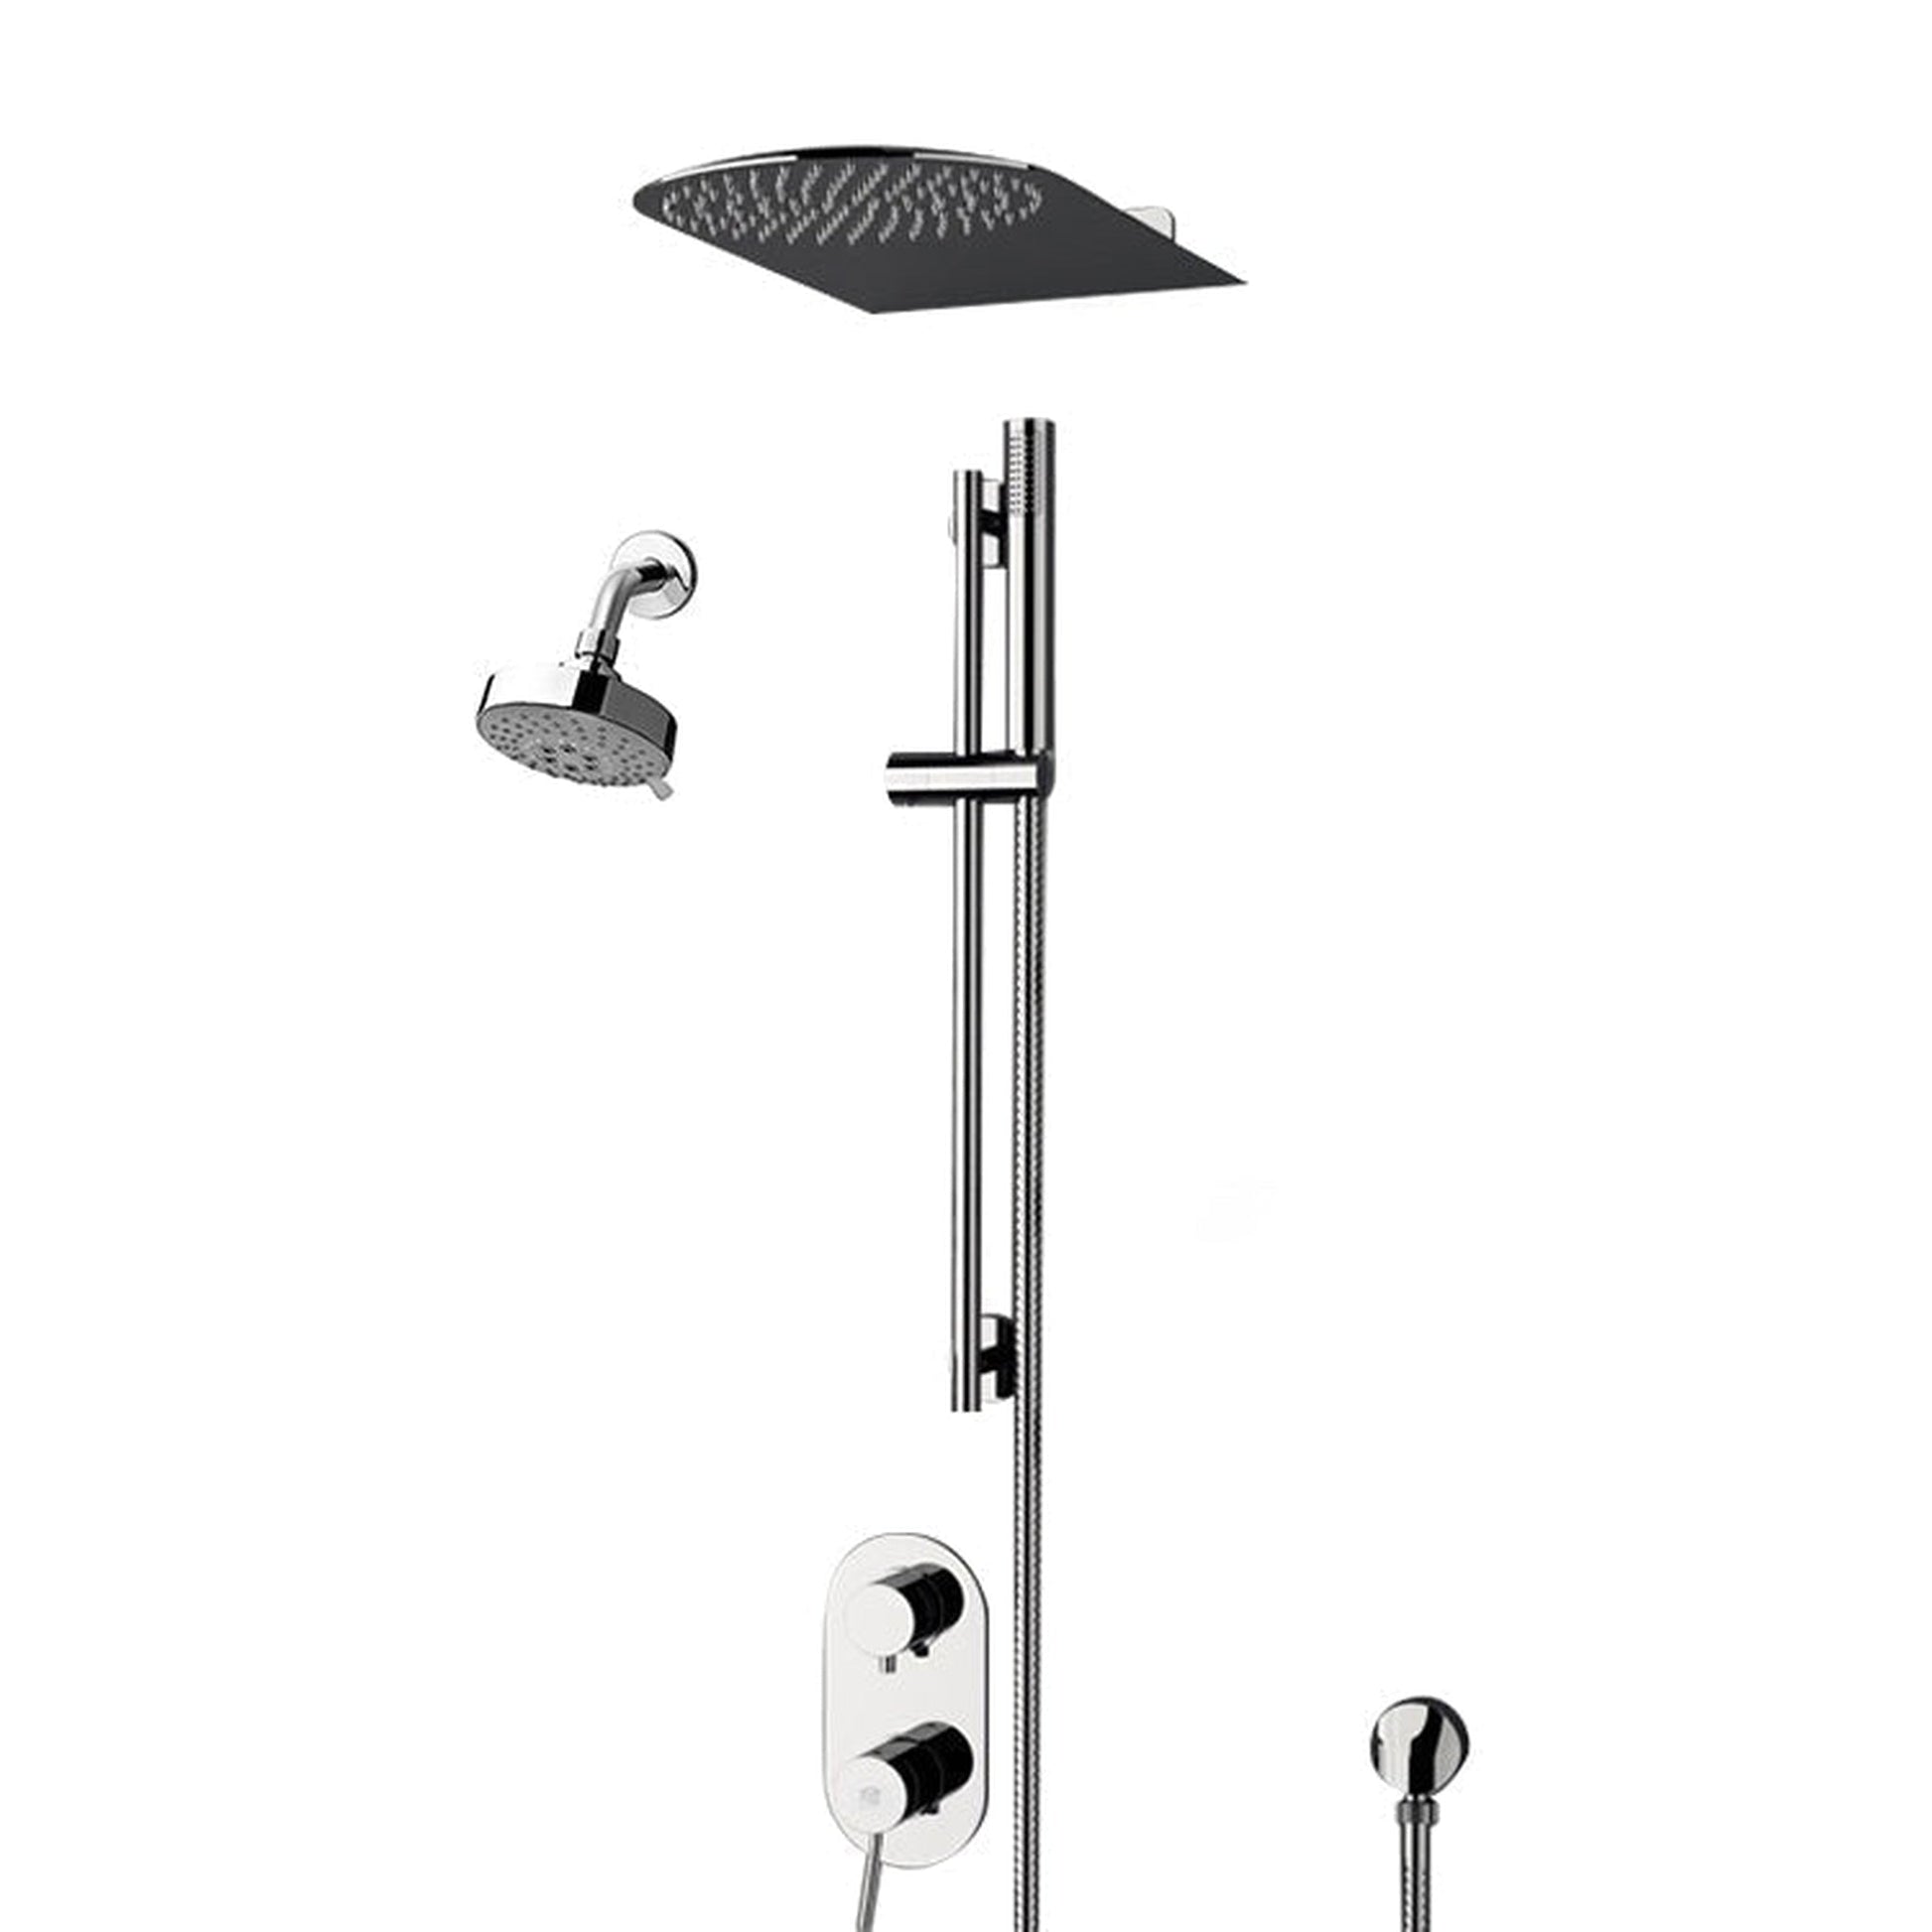 Fontana Deluxe Creative Luxury 20" Chrome Wall-Mounted Dual Shower Head Rainfall Shower System With Hand Shower